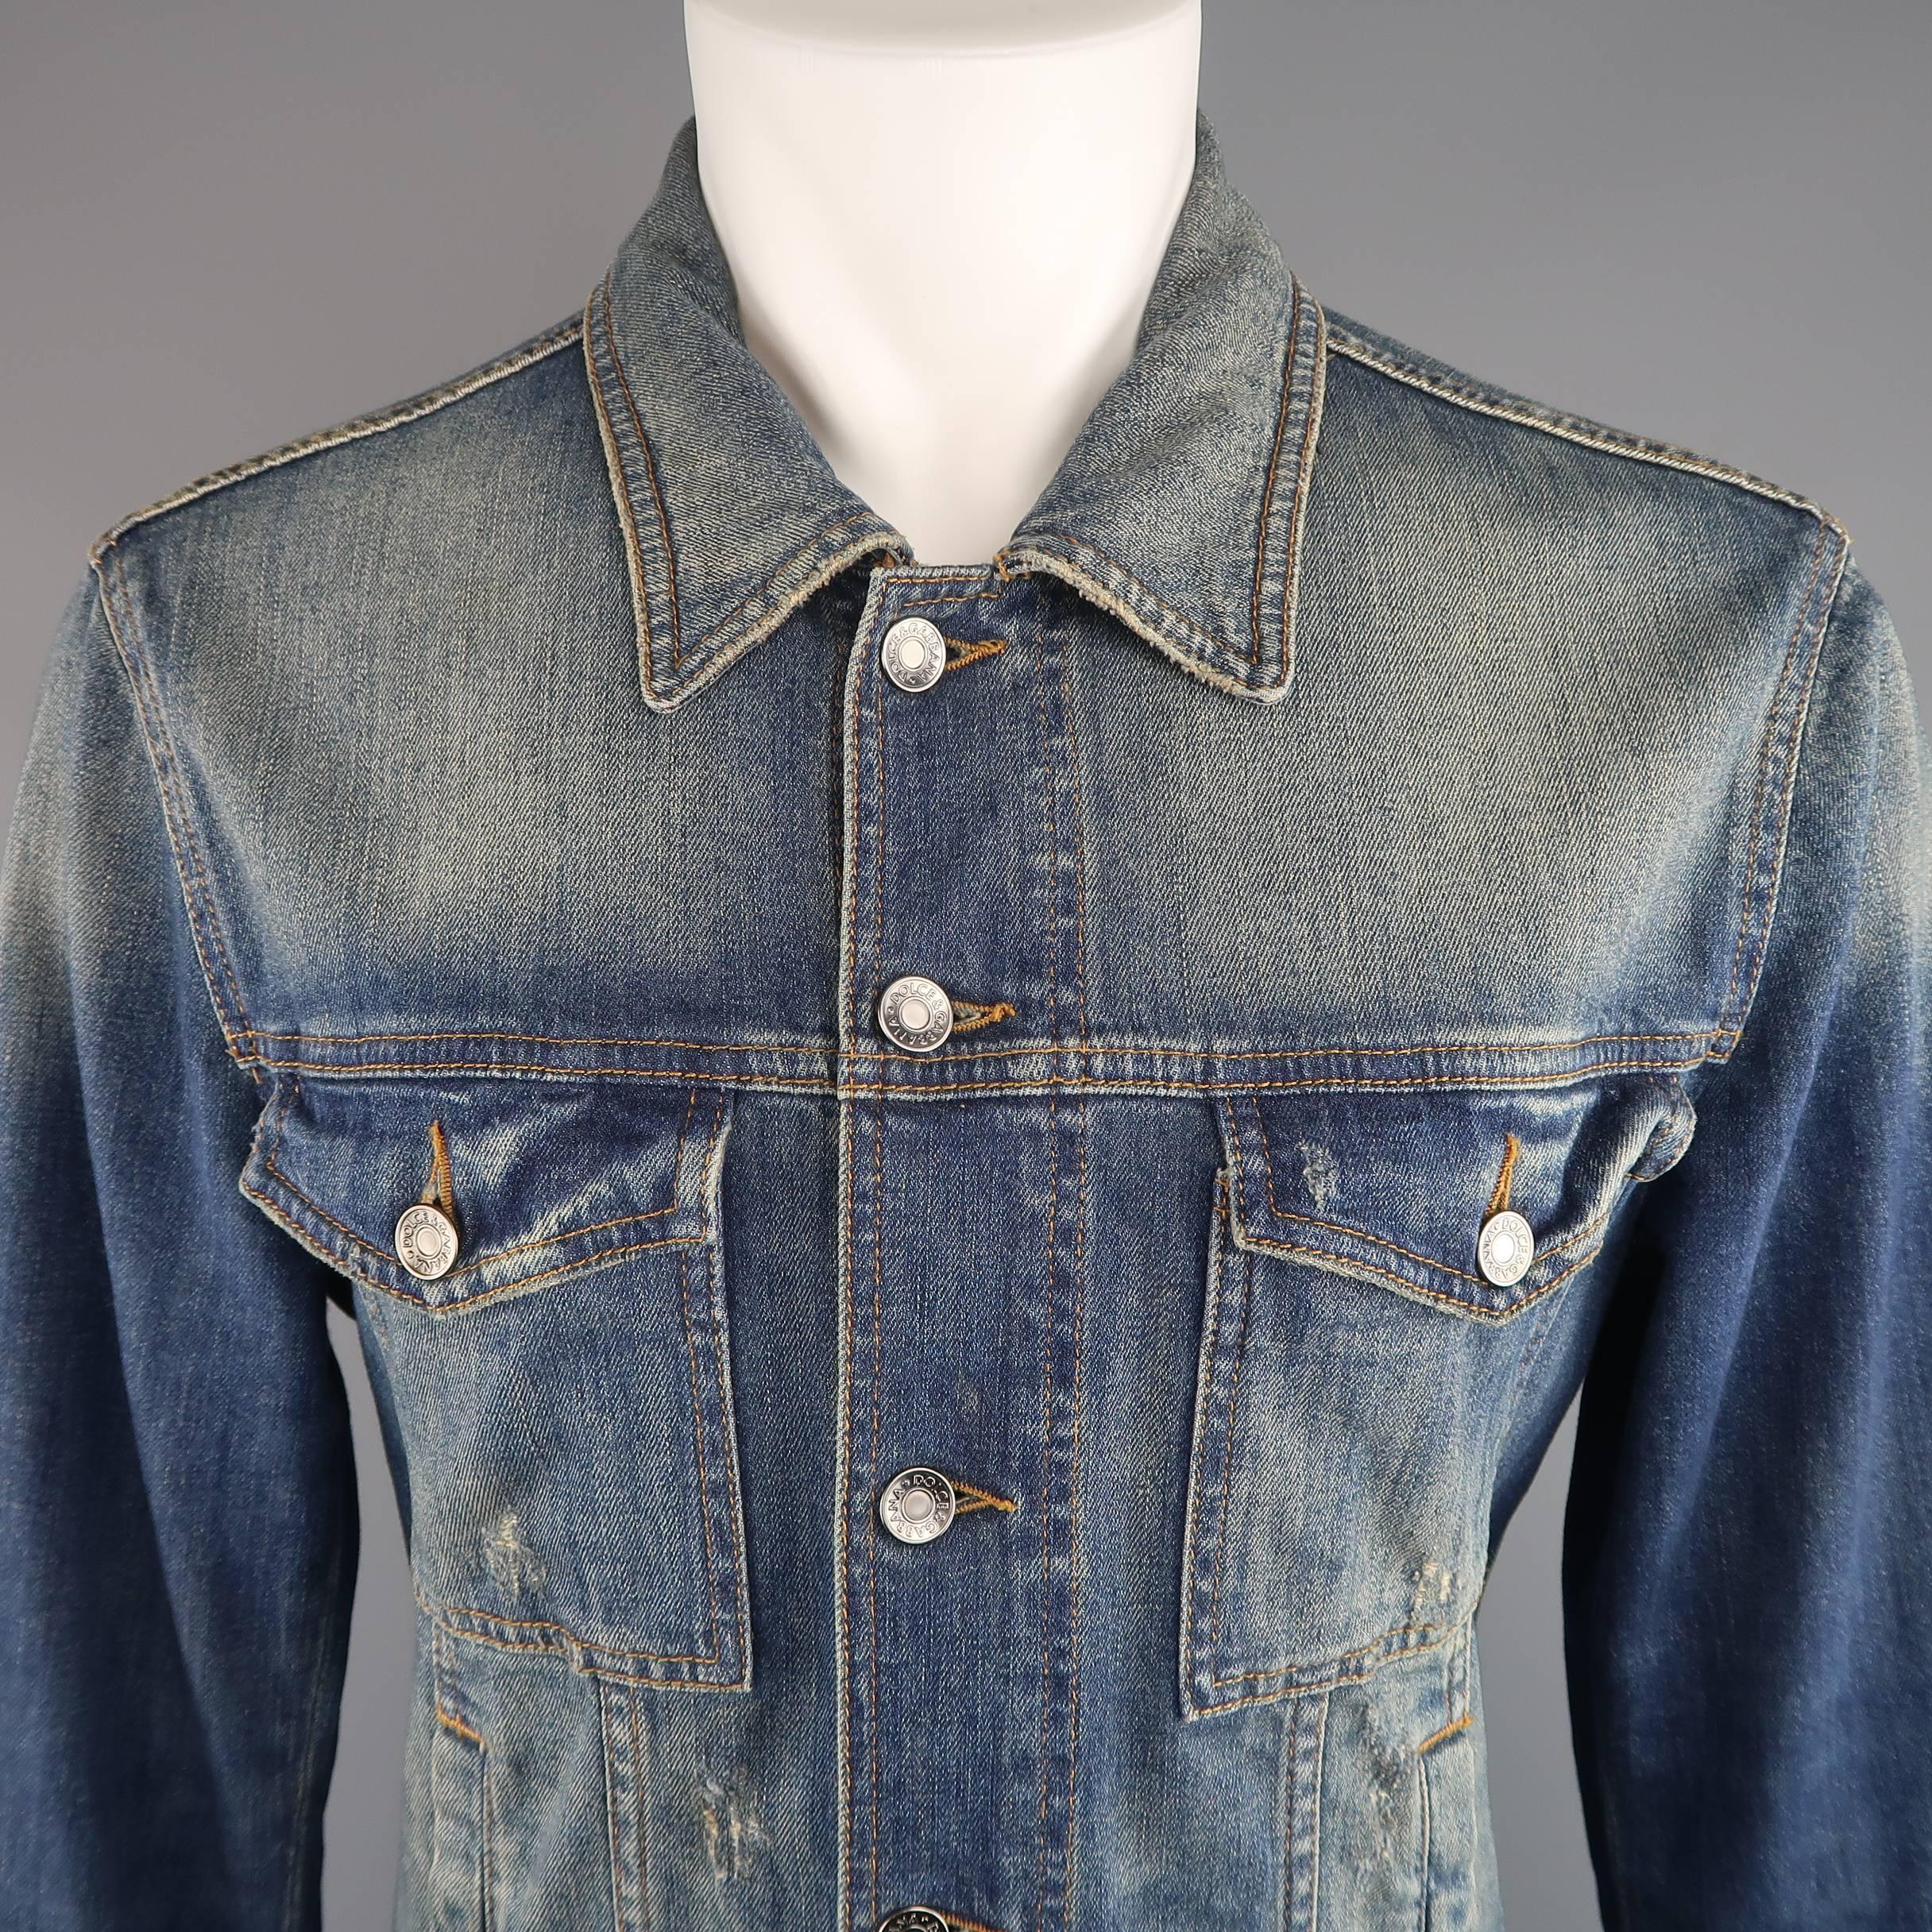 DOLCE & GABBANA trucker jacket comes in a light weight dirty washed stretch denim and features a classic pointed collar, patch flap breast pockets, vertical snap slit pockets, metal plaque back tag, and distressing throughout. Made in Italy.
